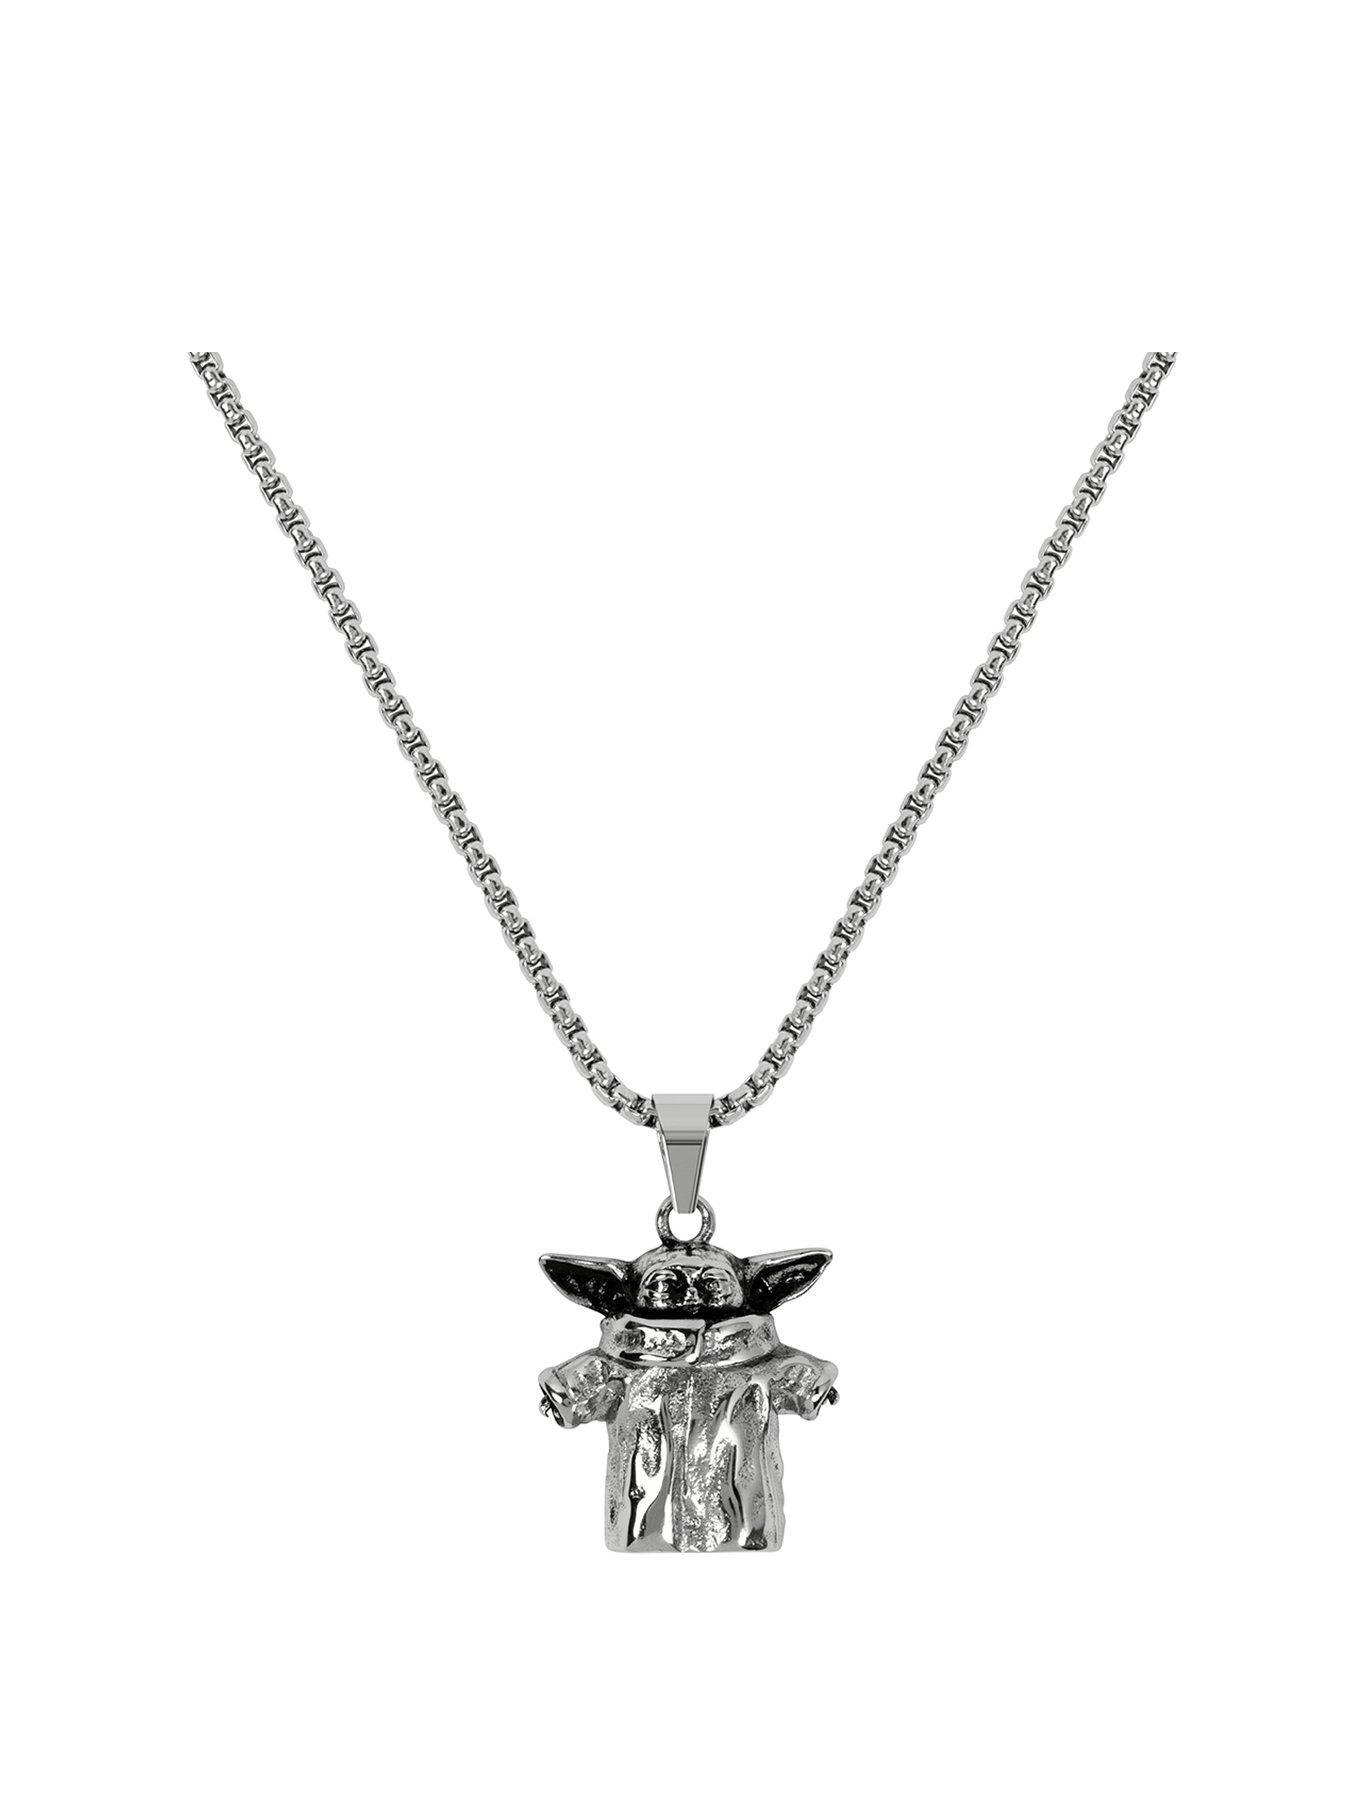  Disney Star Wars Stainless Steel Yoda Pendant With Box Chain